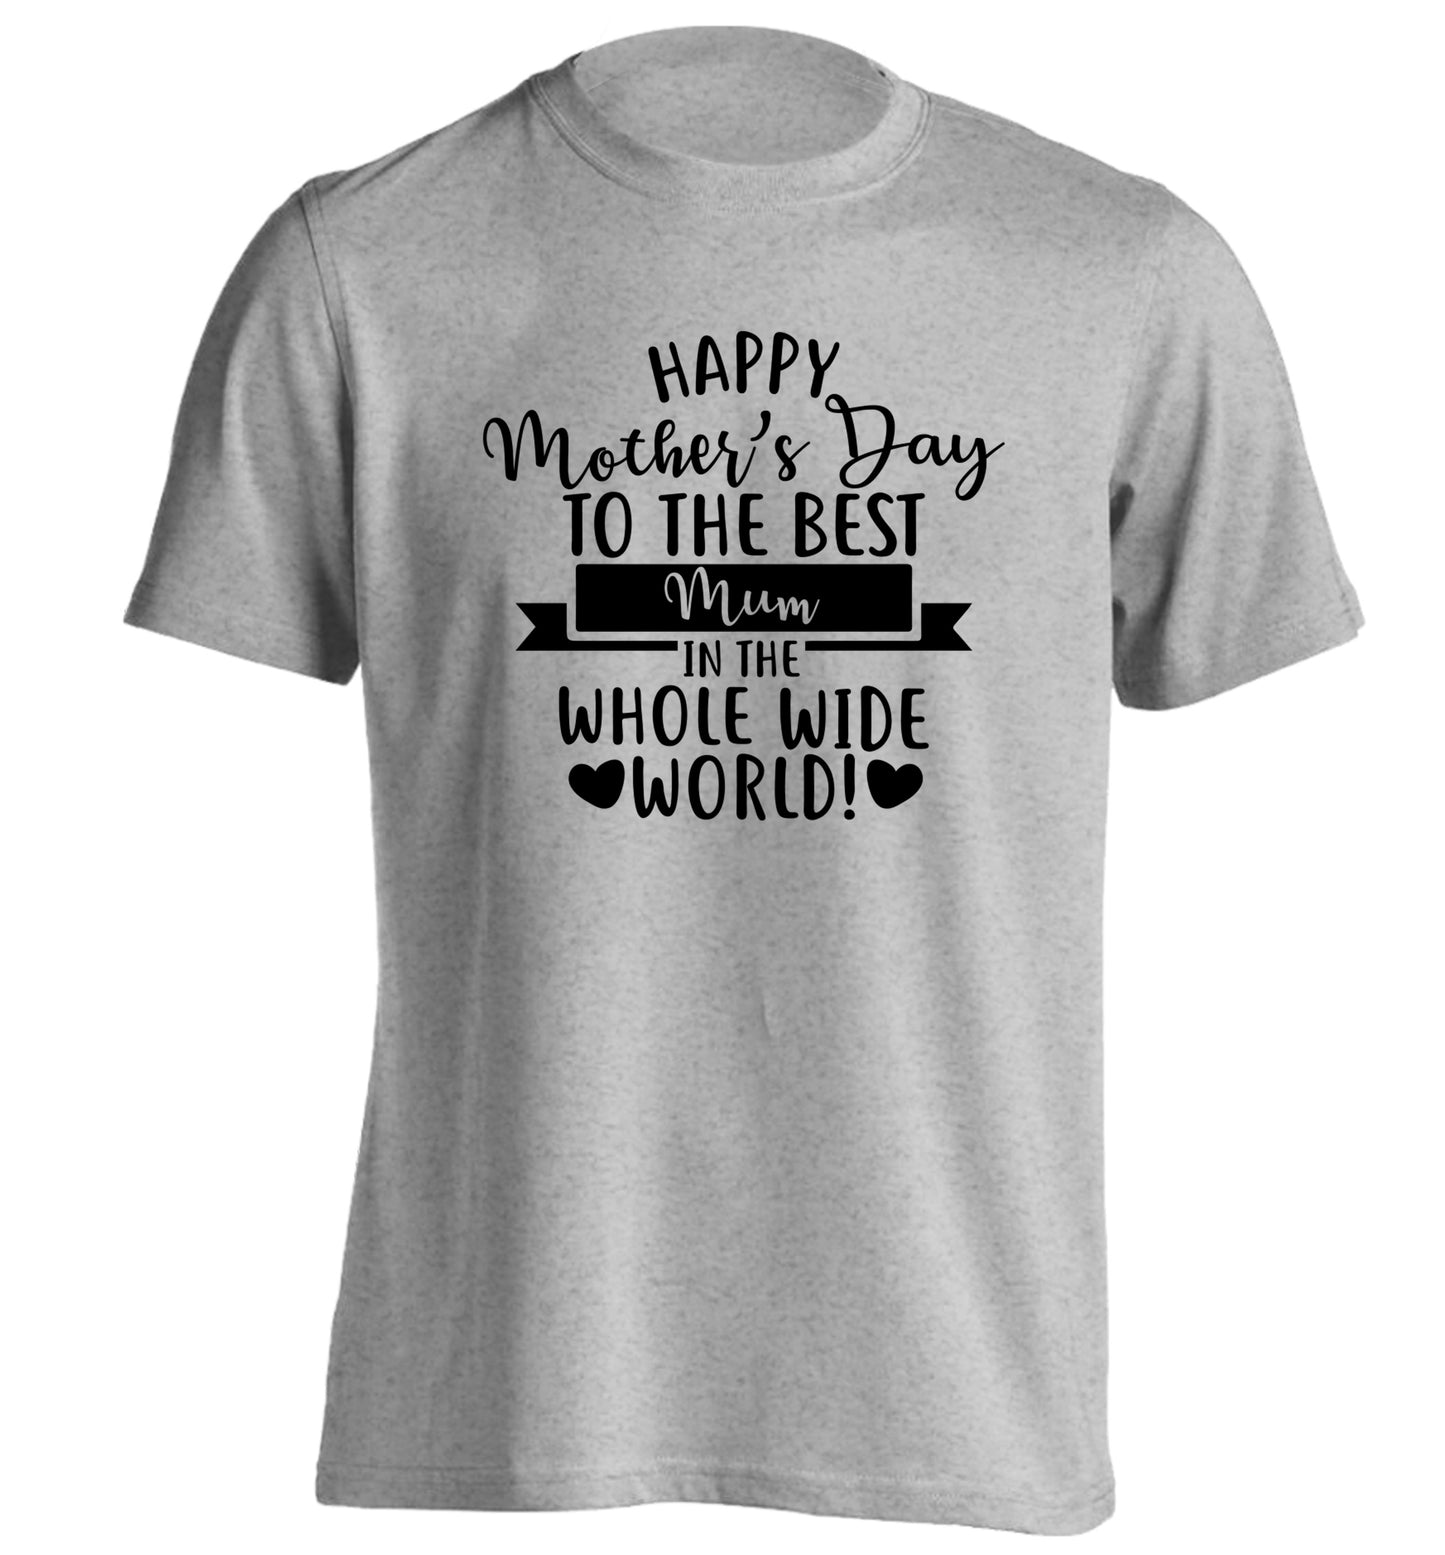 Happy Mother's Day to the best mum in the whole wide world! adults unisex grey Tshirt 2XL